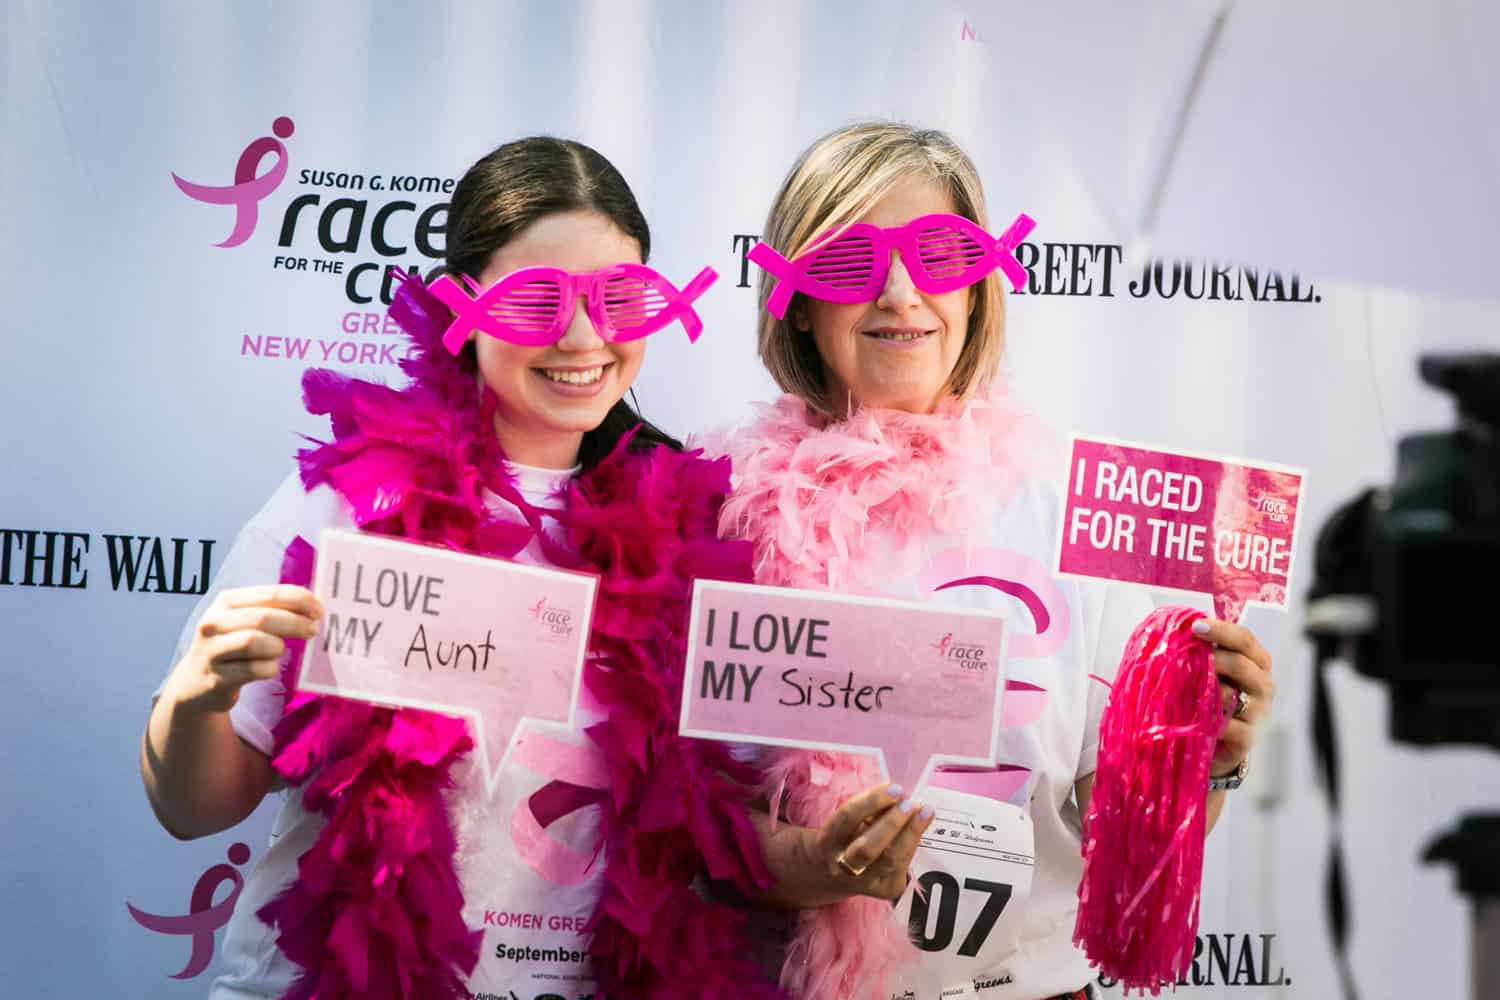 NYC Race for the Cure photos of two women clowning around at photobooth